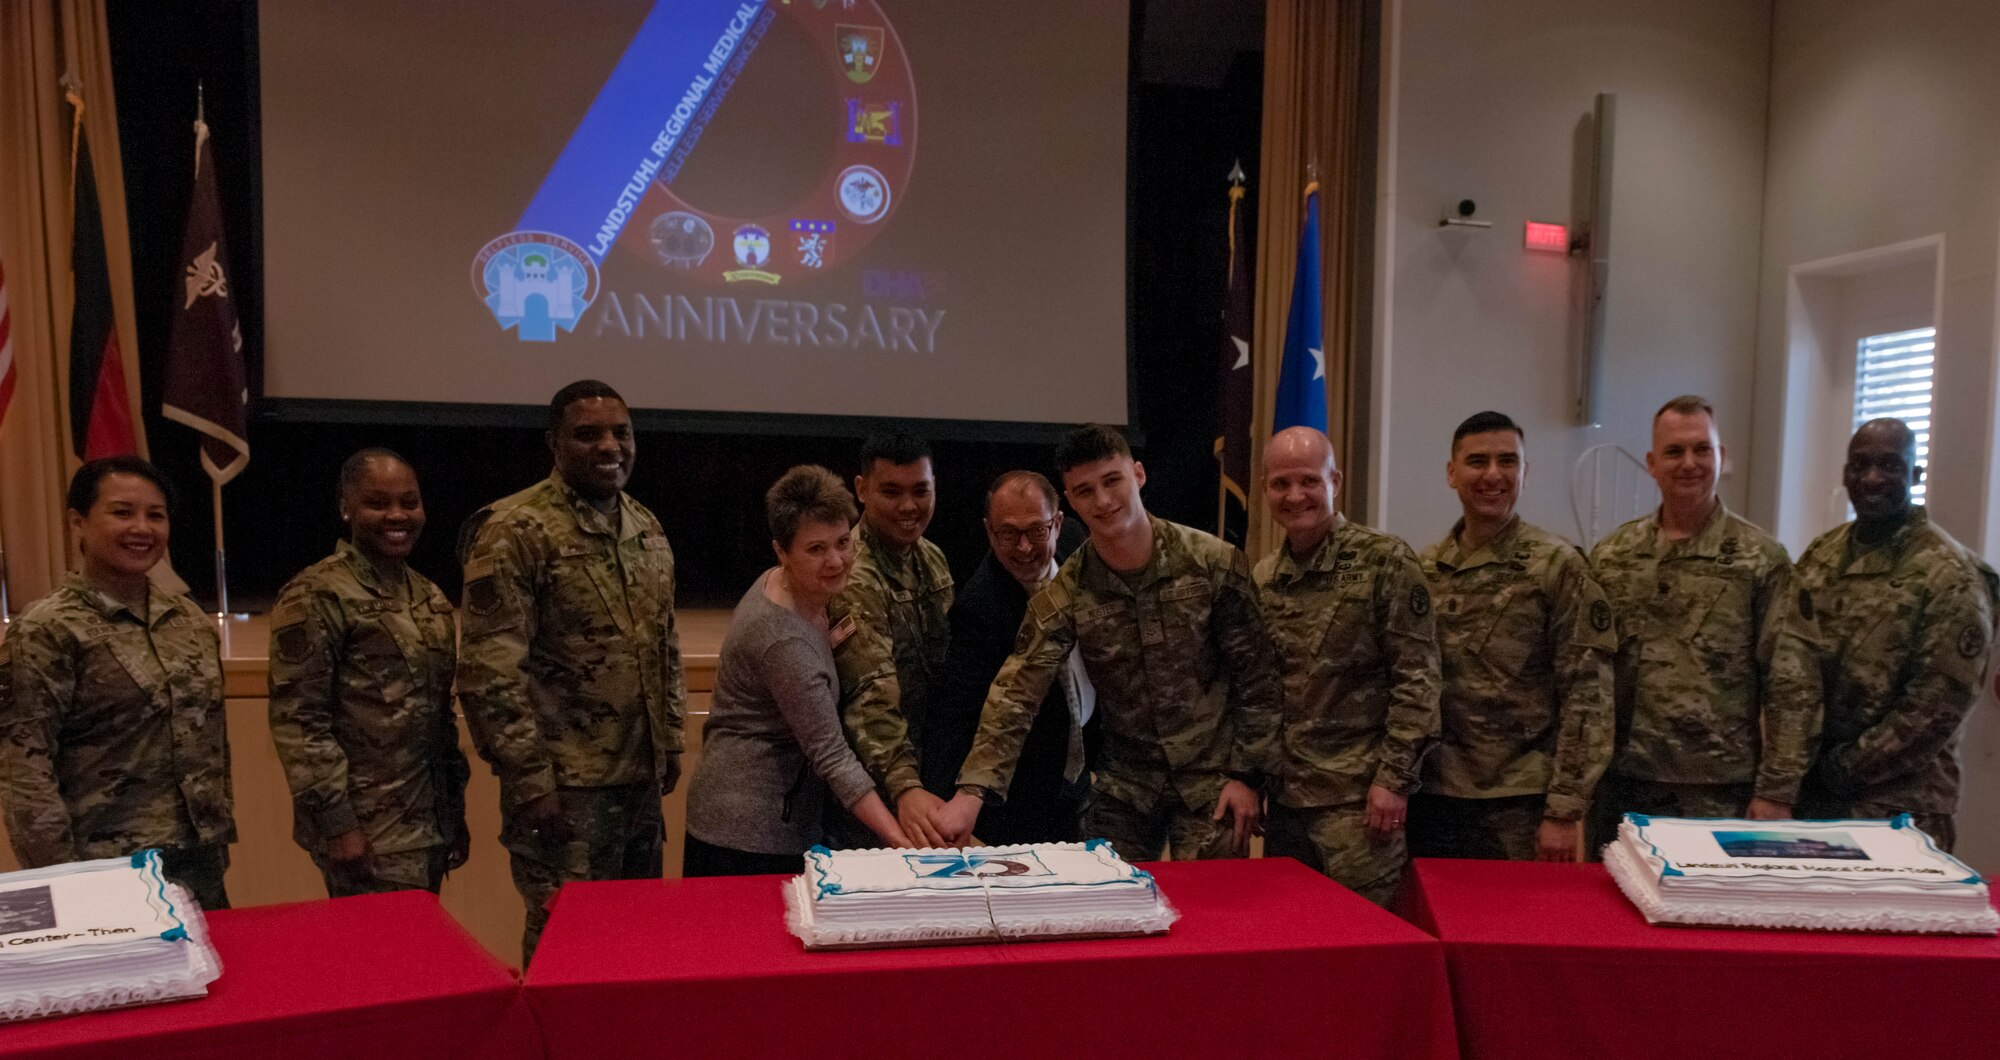 Leadership from Landstuhl Regional Medical Center and Ramstein Air Base, Germany, celebrate their 30-year partnership during a cake cutting ceremony at LMRC, April 14, 2023. LRMC opened its doors 70 years ago and began their partnership with the 86 Medical Squadron in 1993.